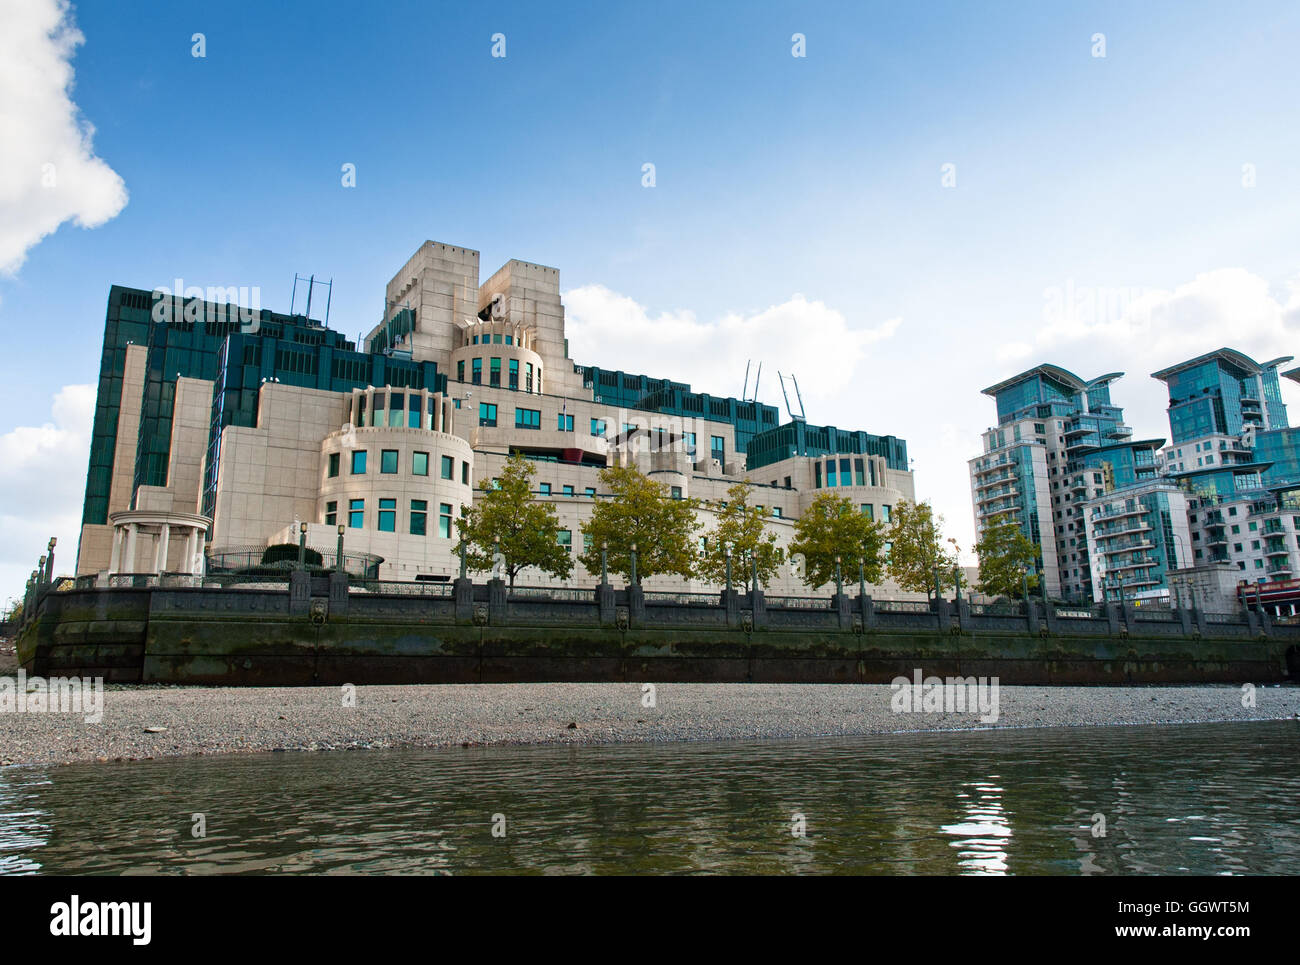 SIS or MI6 headquarters building at Vauxhall Cross viewed from the Thames River. It is located at 85 Albert Embankment, London Stock Photo